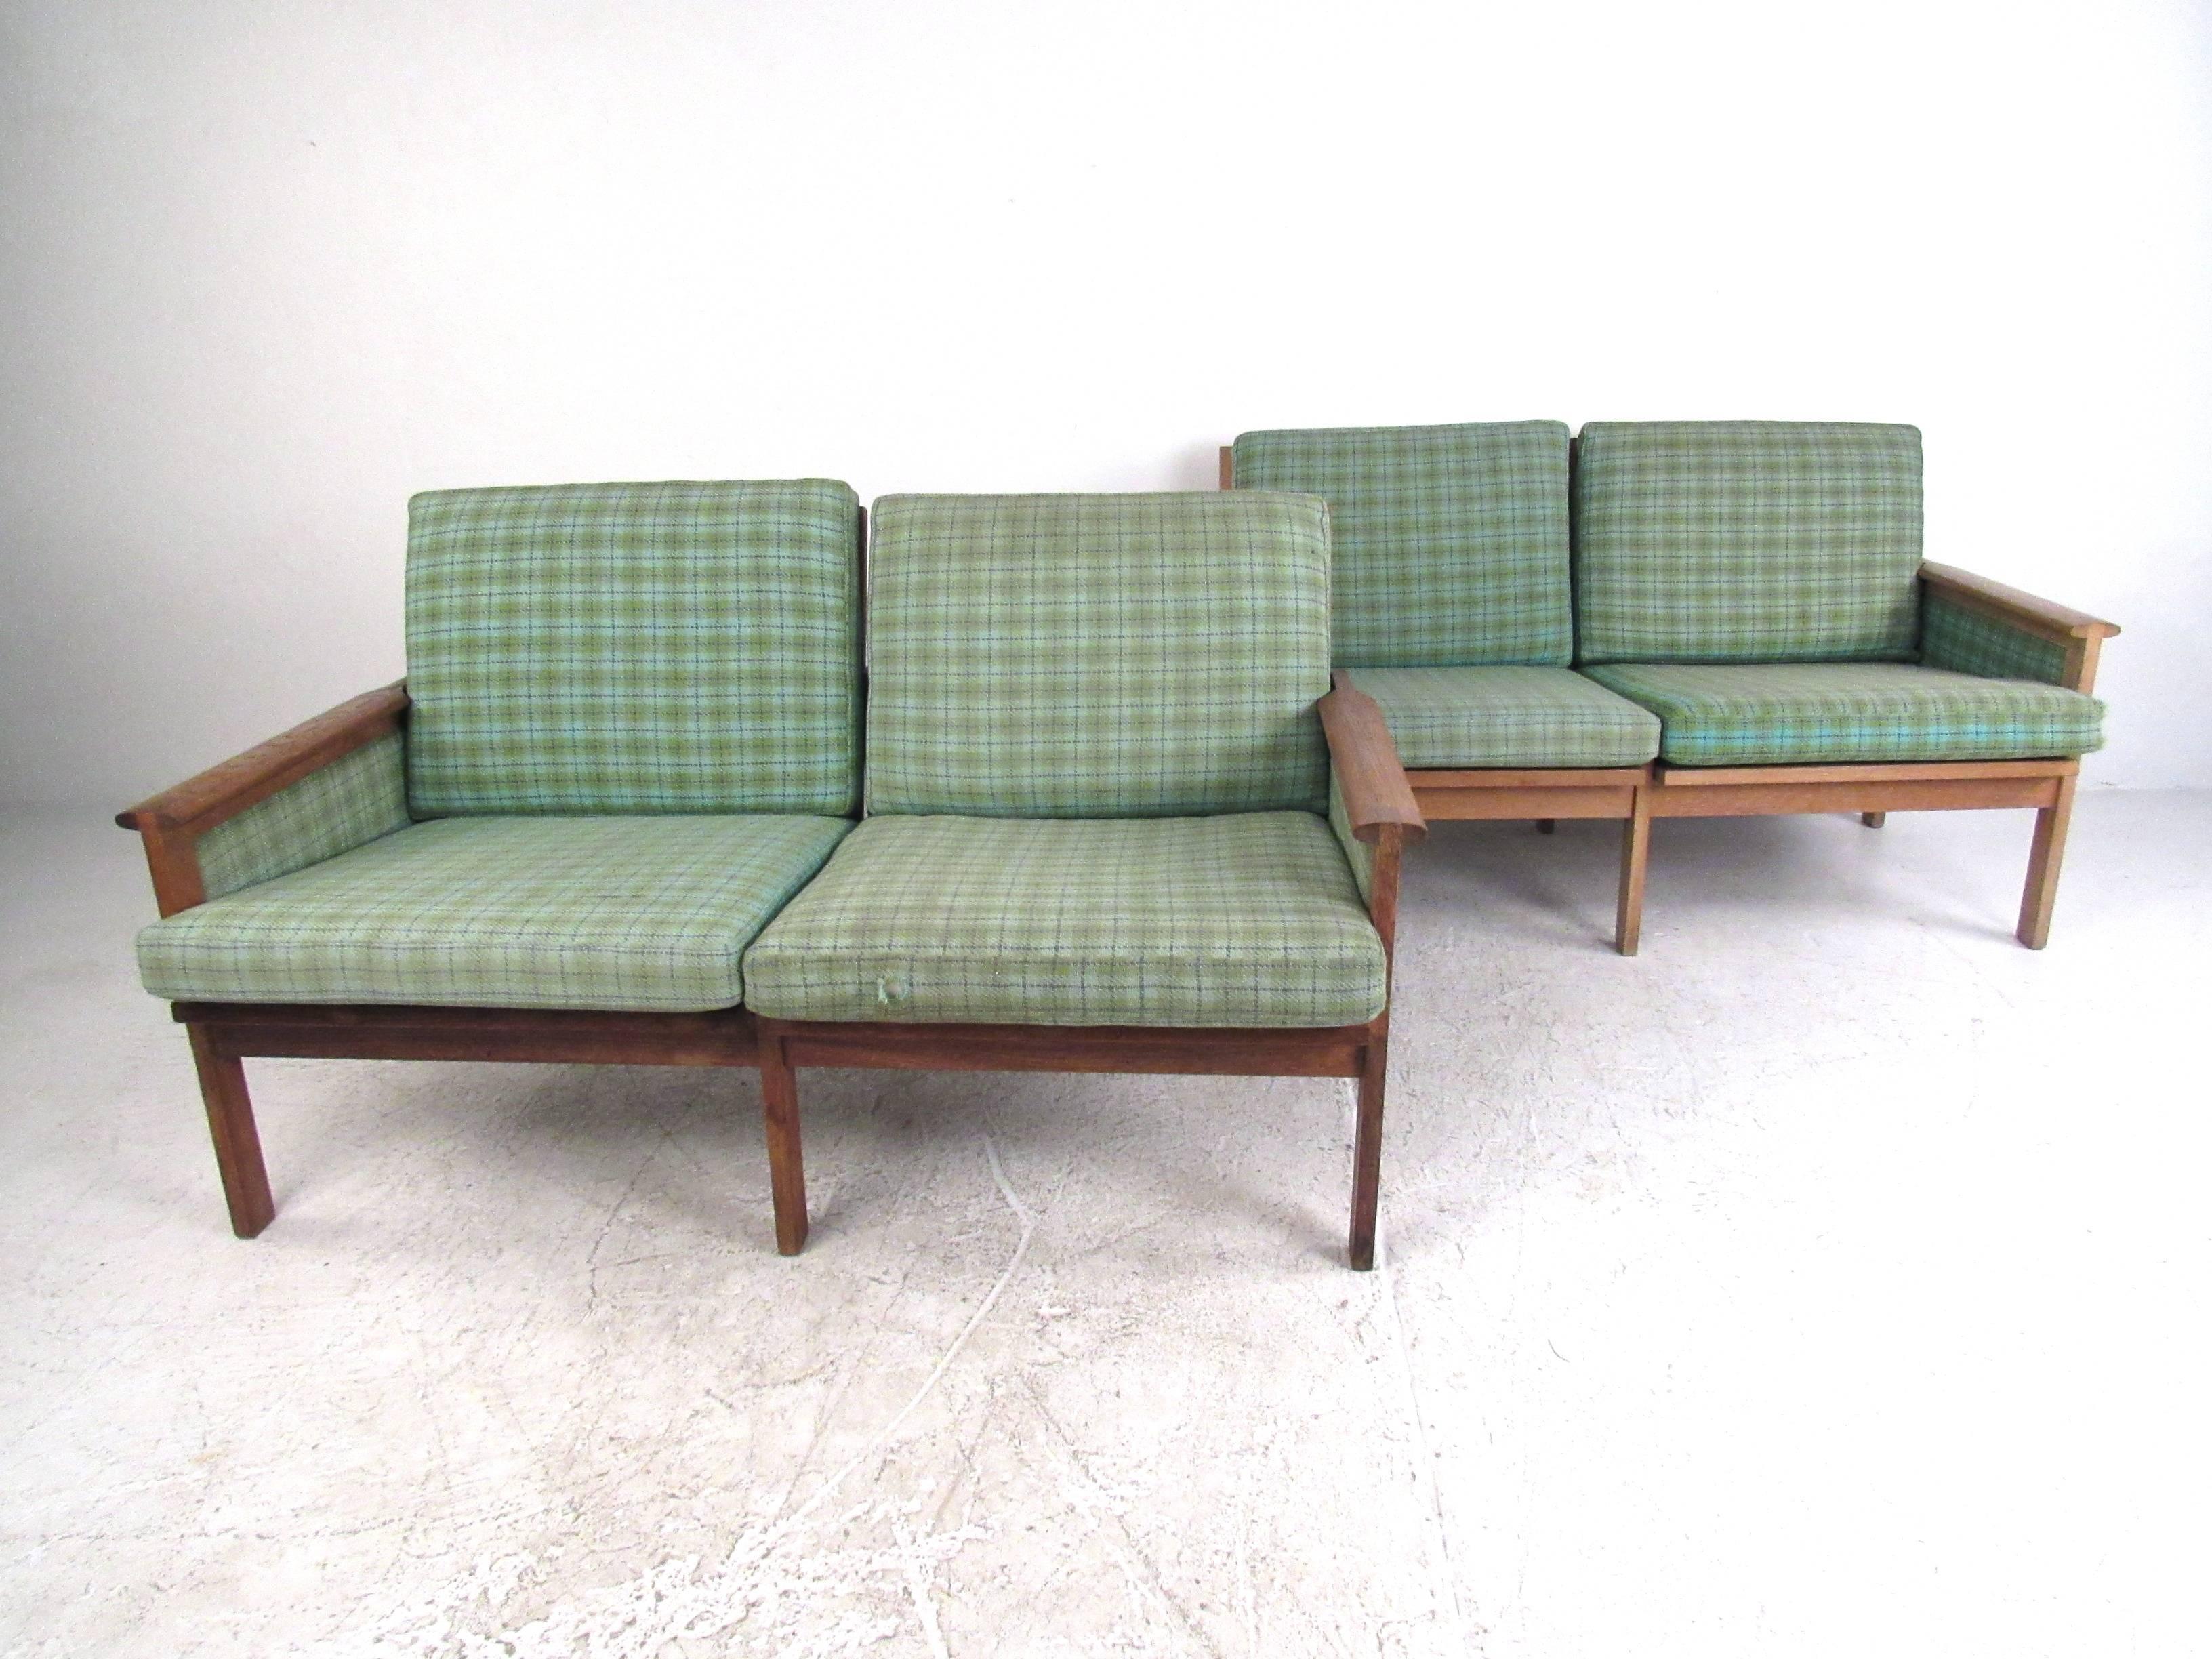 This stunning pair of vintage Danish teak settees make a beautiful Mid-Century addition to seating at home, office, or business. Unique upholstered frames, sculpted armrests, and versatile size make this matching pair the perfect set for rounding